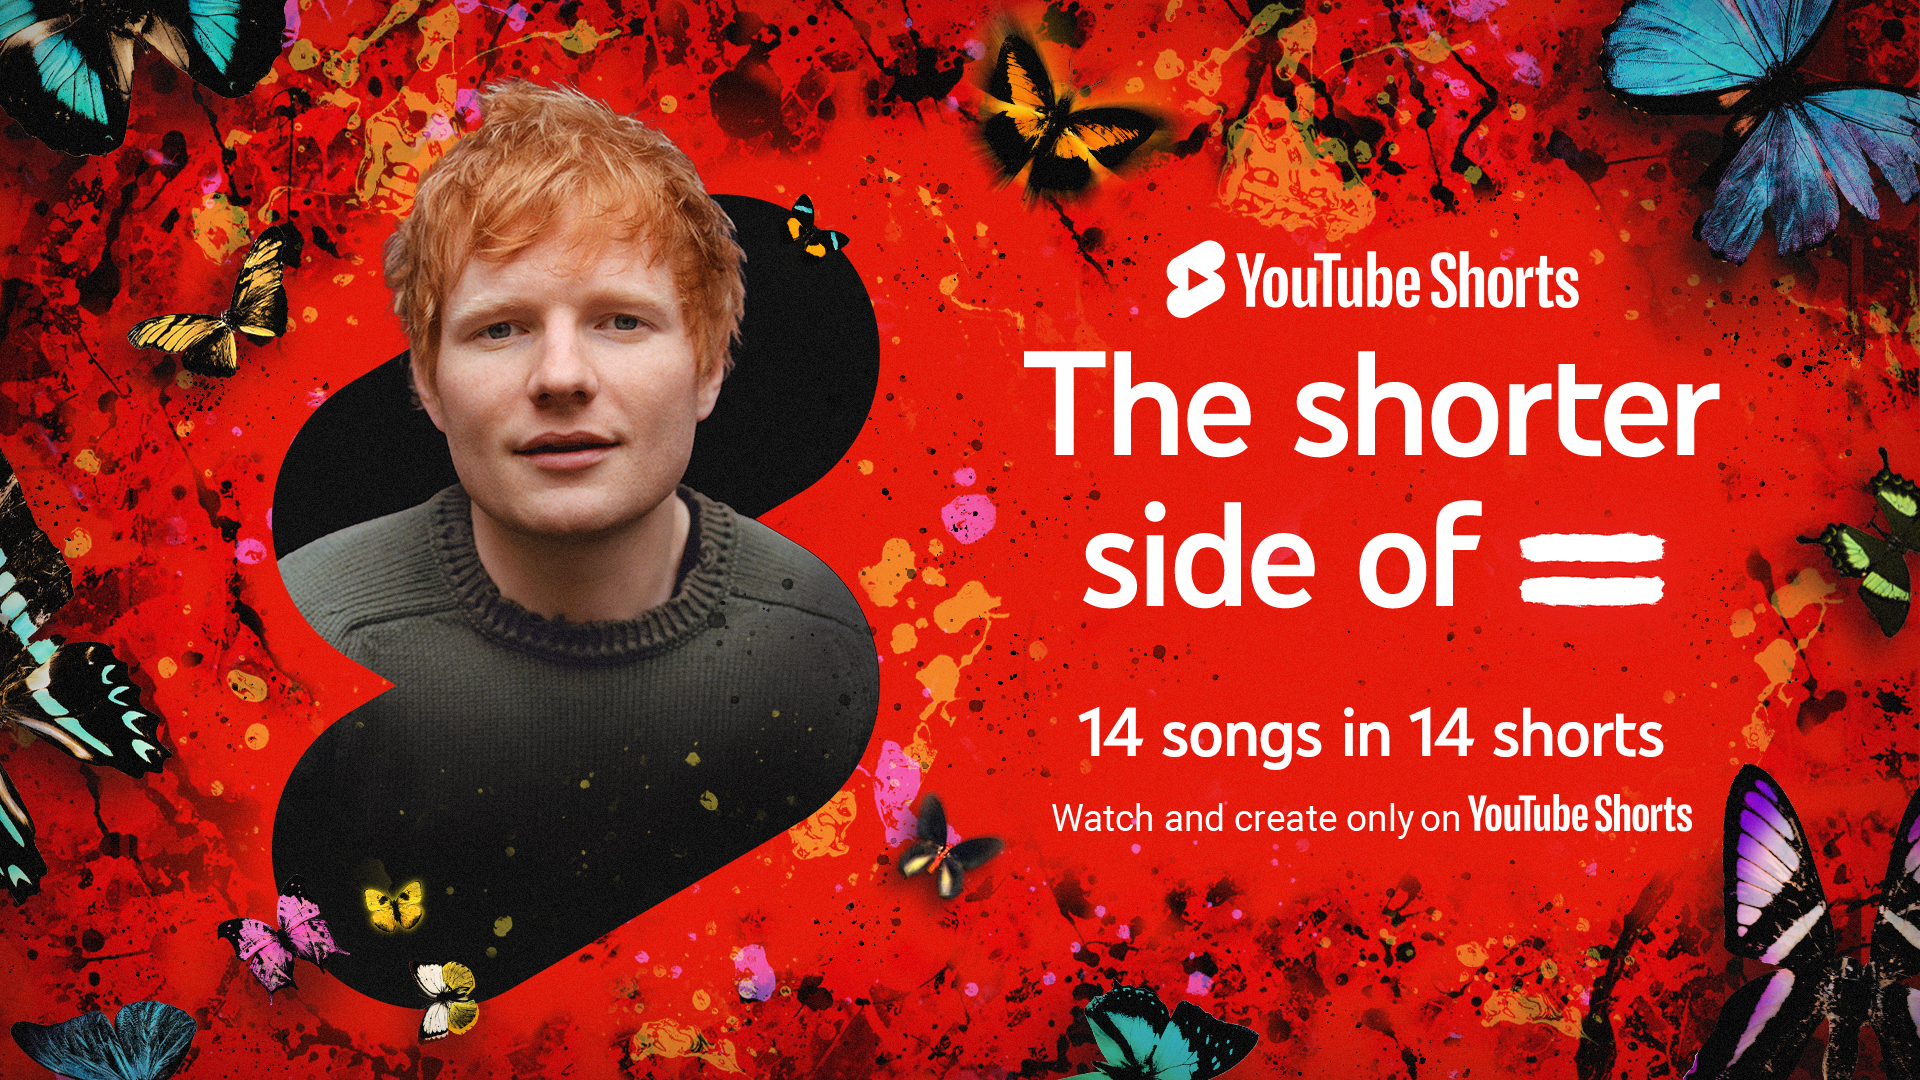 YouTube Shorts gets boost with Ed Sheeran album preview